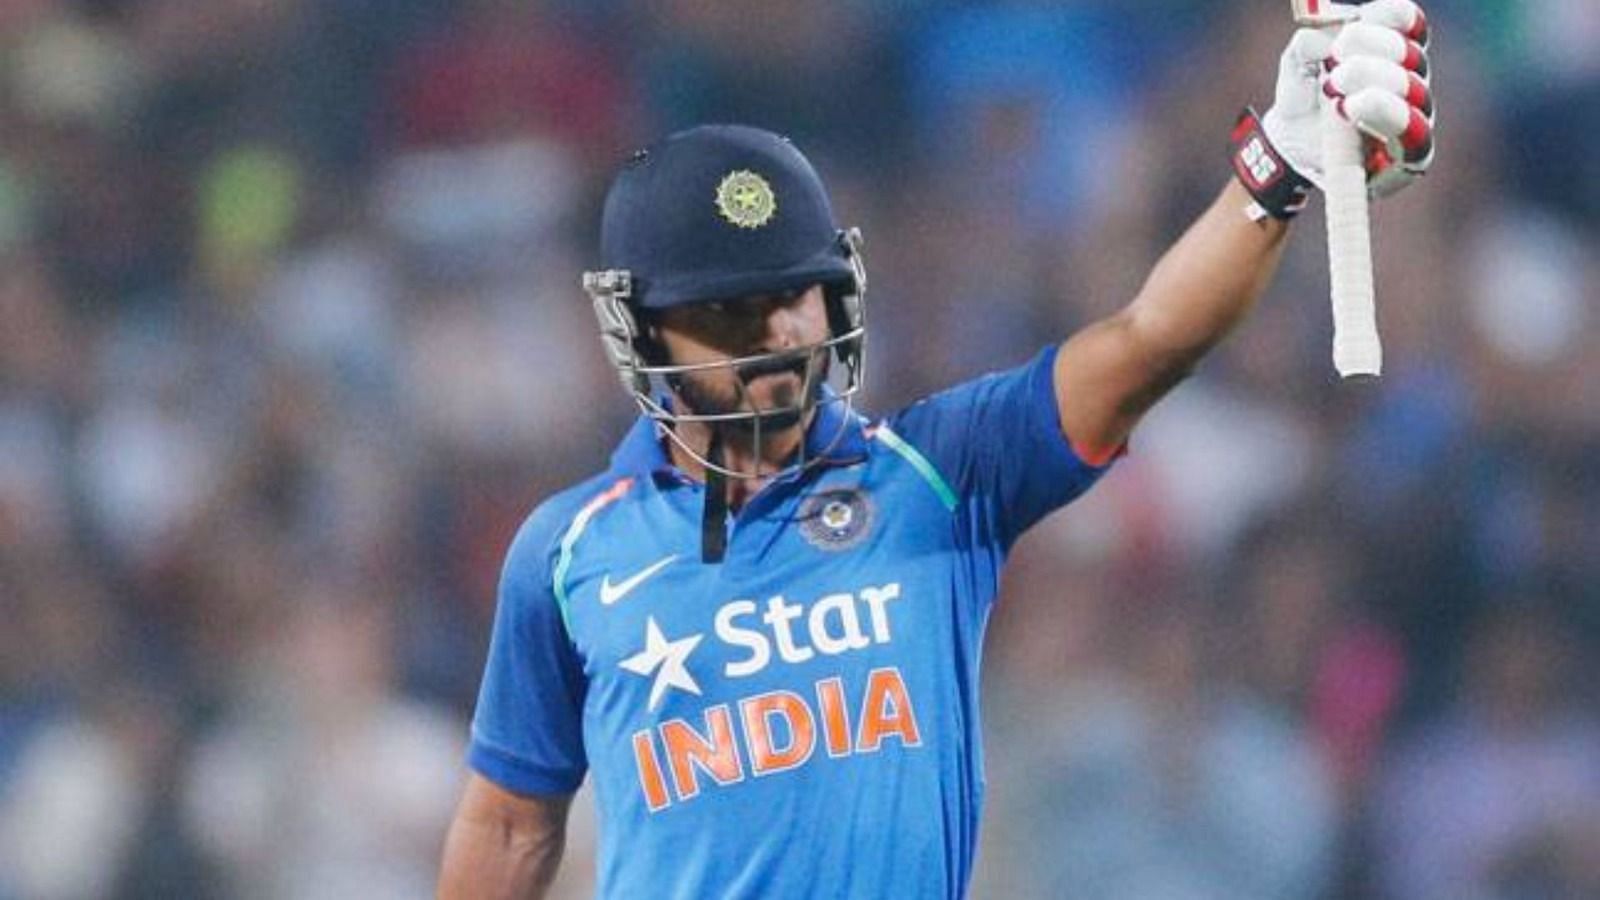 Jadhav stitched a crucial partnership with Kohli to take India to victory